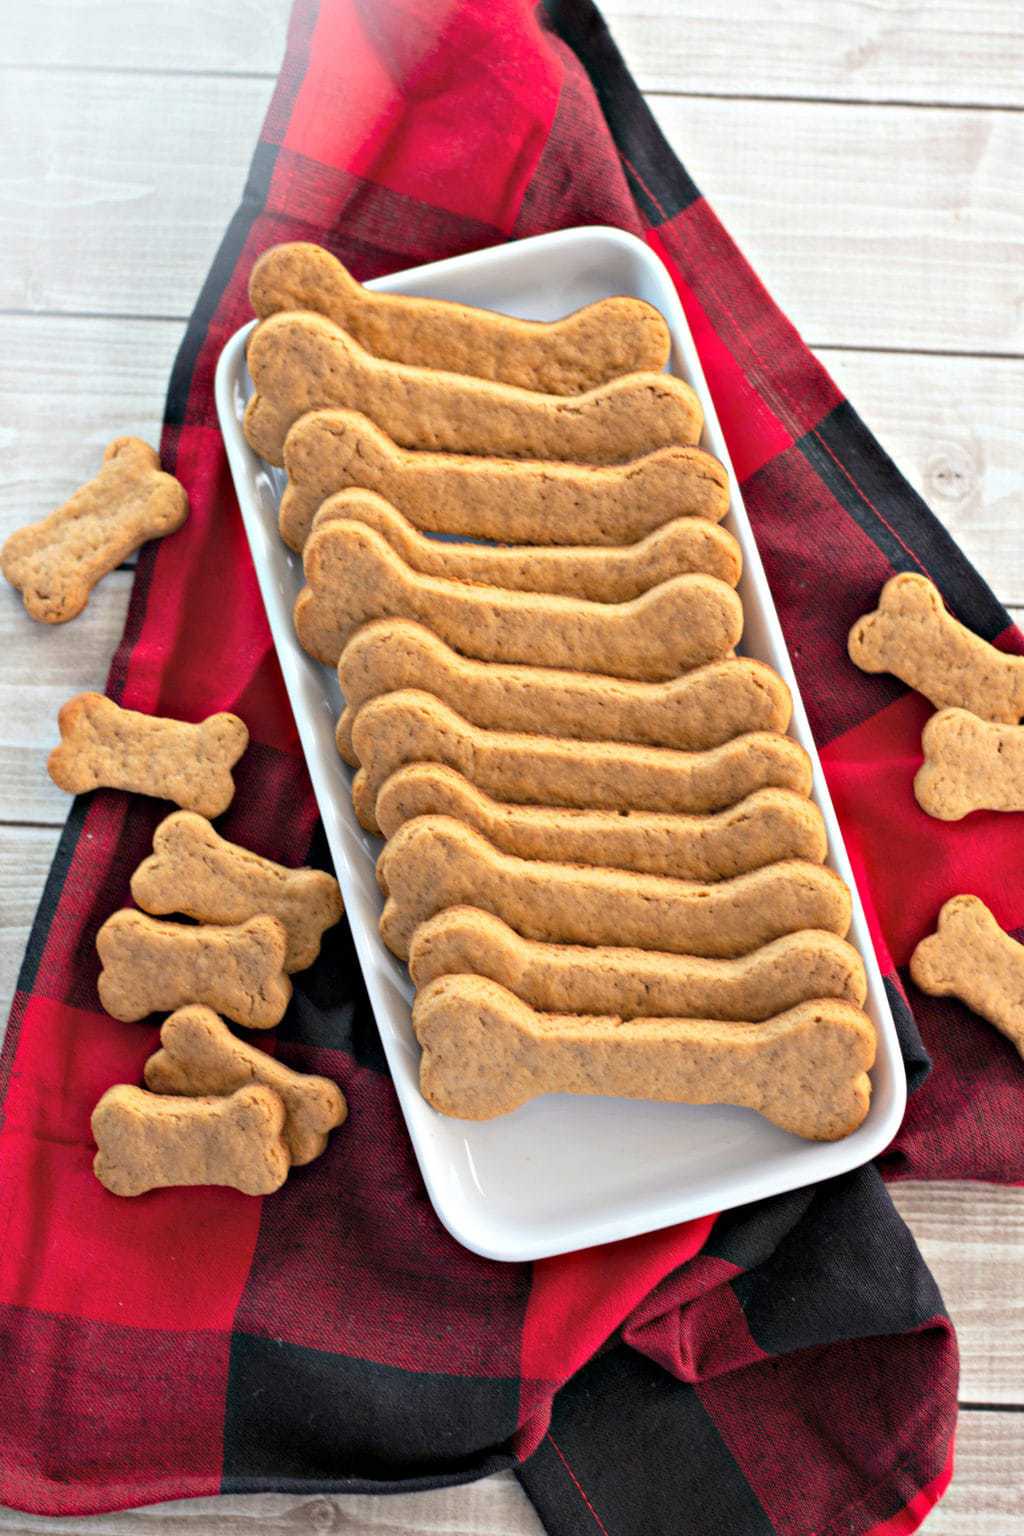 Homemade Dog Treats Package 2 1 Scaled 